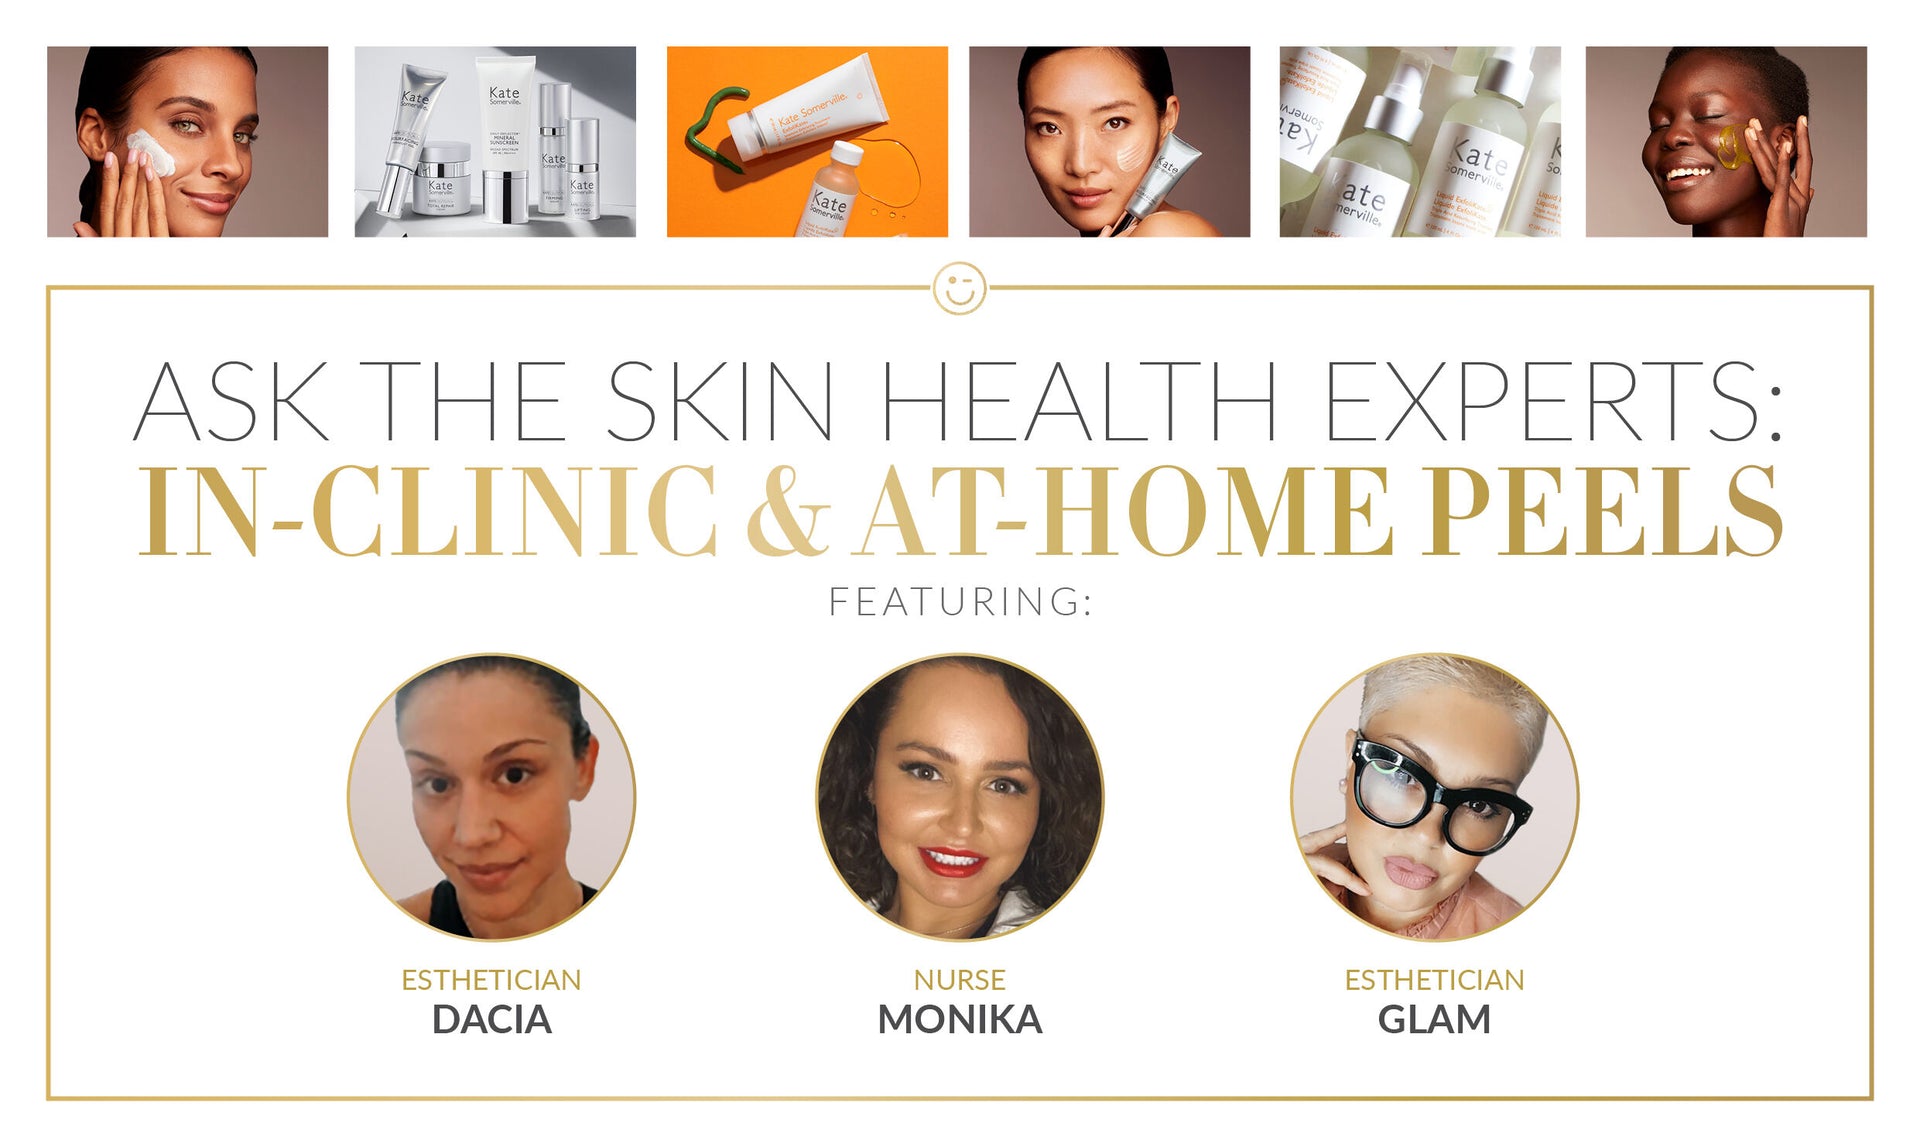 ASK THE SKIN HEALTH EXPERTS: IN-CLINIC & AT-HOME PEELS